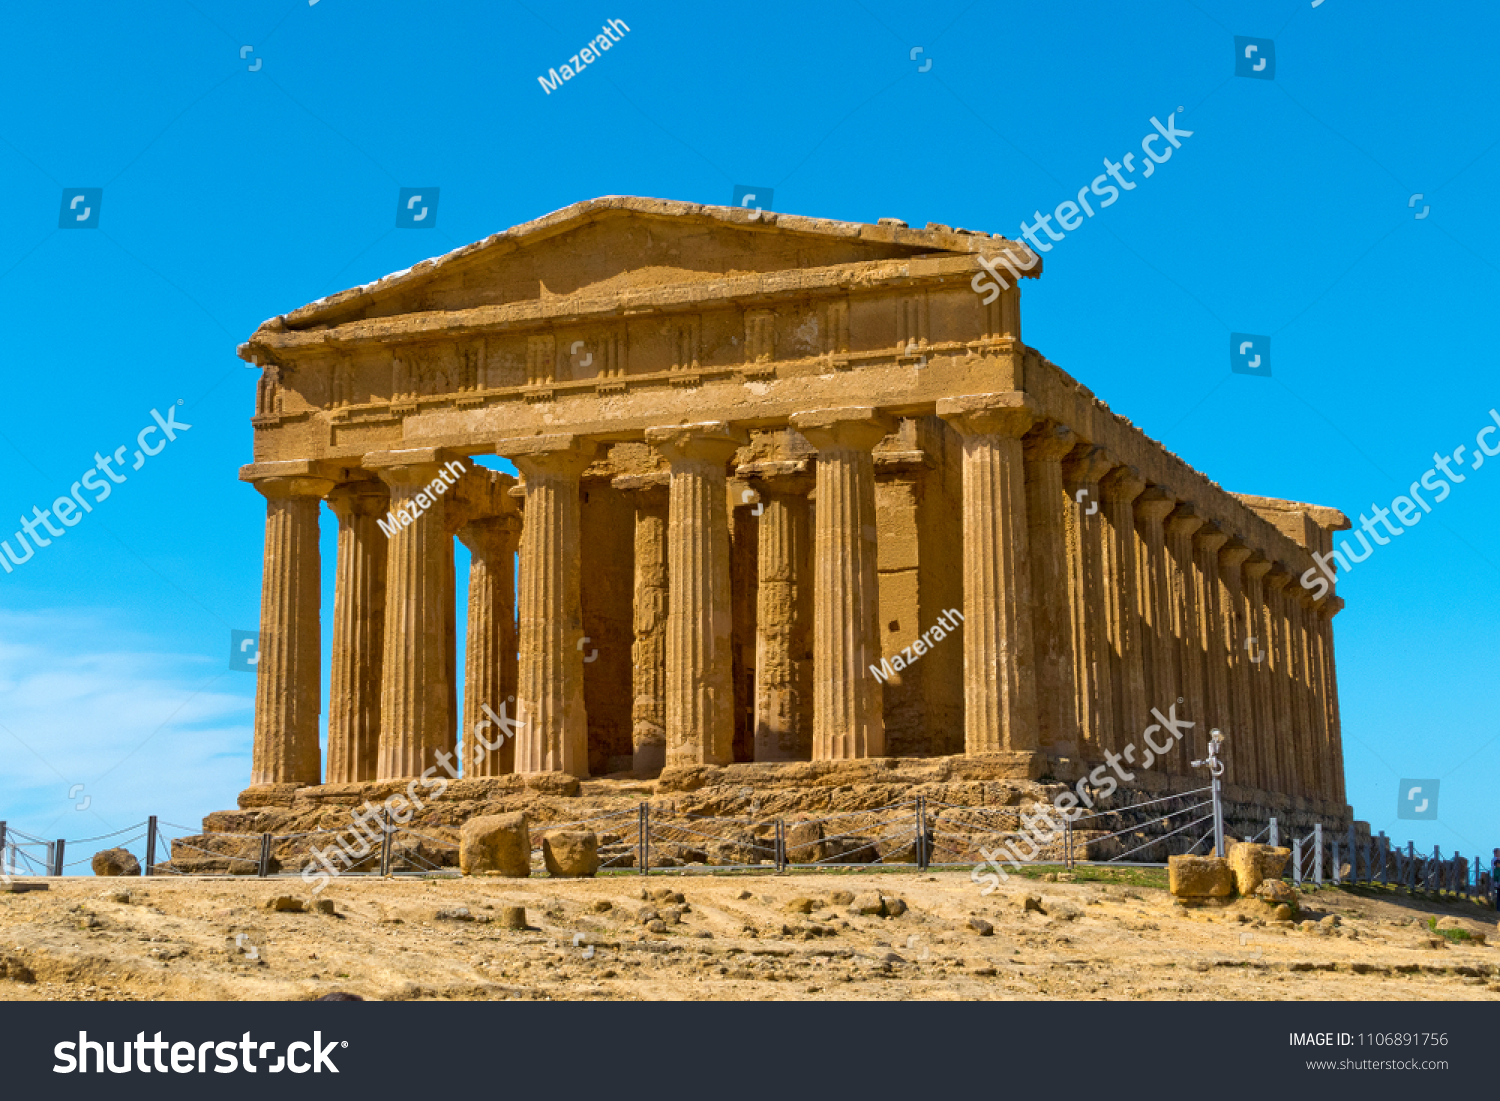 Valley of the Temples (Valle dei Templi) - The Temple of Concordia,  an ancient Greek Temple built in the 5th century BC, Agrigento, Sicily
 #1106891756